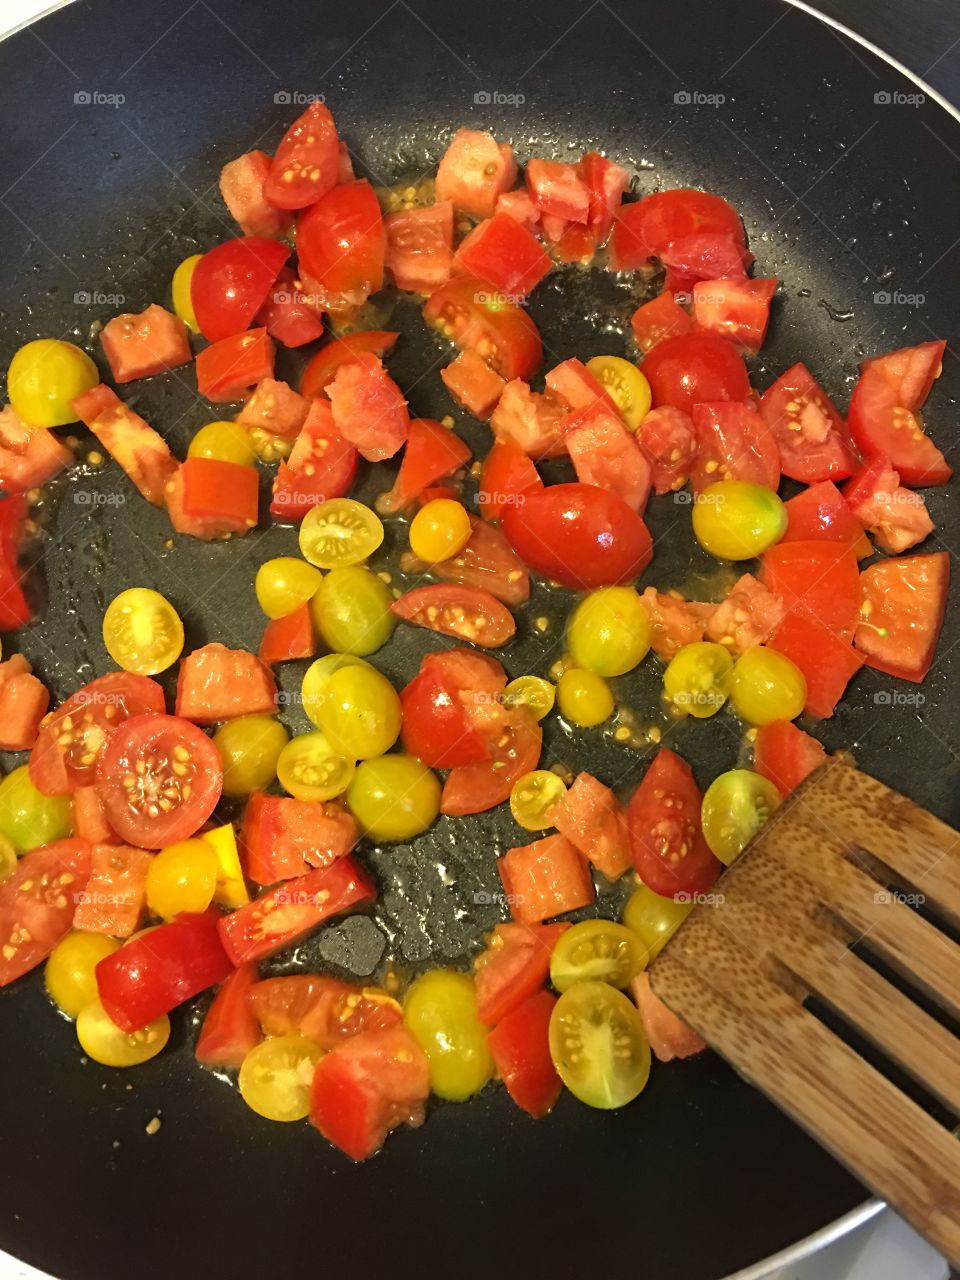 Red and yellow tomatoes sautéed in a skillet